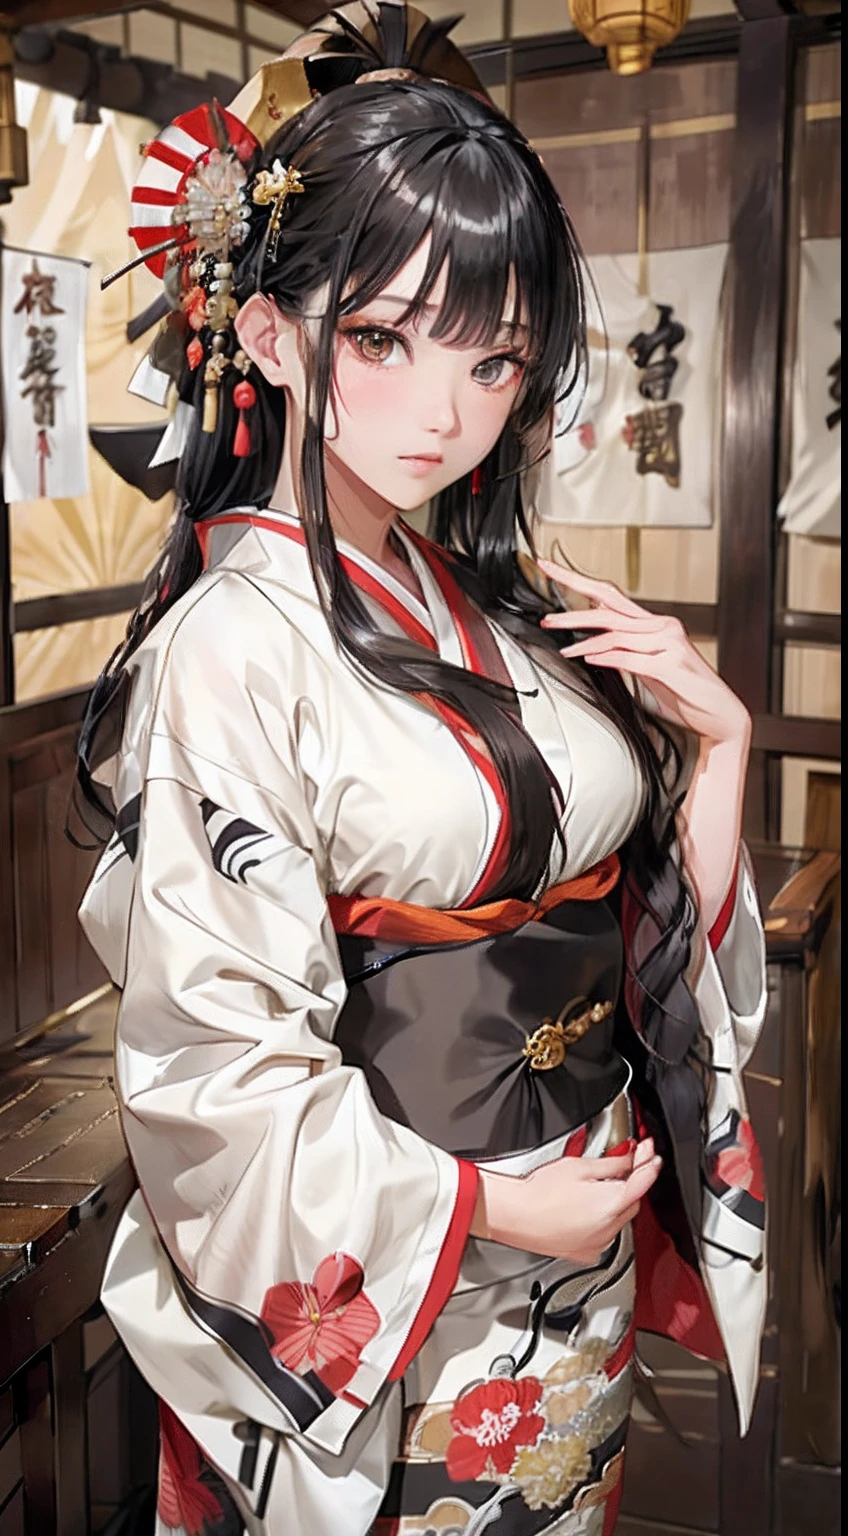 (Oiran:1.4)、1girl in,Black hair fringe long hair、Braided hair、disheveled hair、Light brown eyes、(Extraordinary beauty)、(dignified expression)、(Traditional kimono with colorful and shiny luxury Japan:1.4)、(Big Tits:1.4)、dojo、(Photorealsitic)、(intricate detailes:1.2)、(​masterpiece、:1.3)、(top-quality:1.4)、(超A high resolution:1.2)、超A high resolution、(A detailed eye)、(detailed facial features)、wearing kimono_clothes